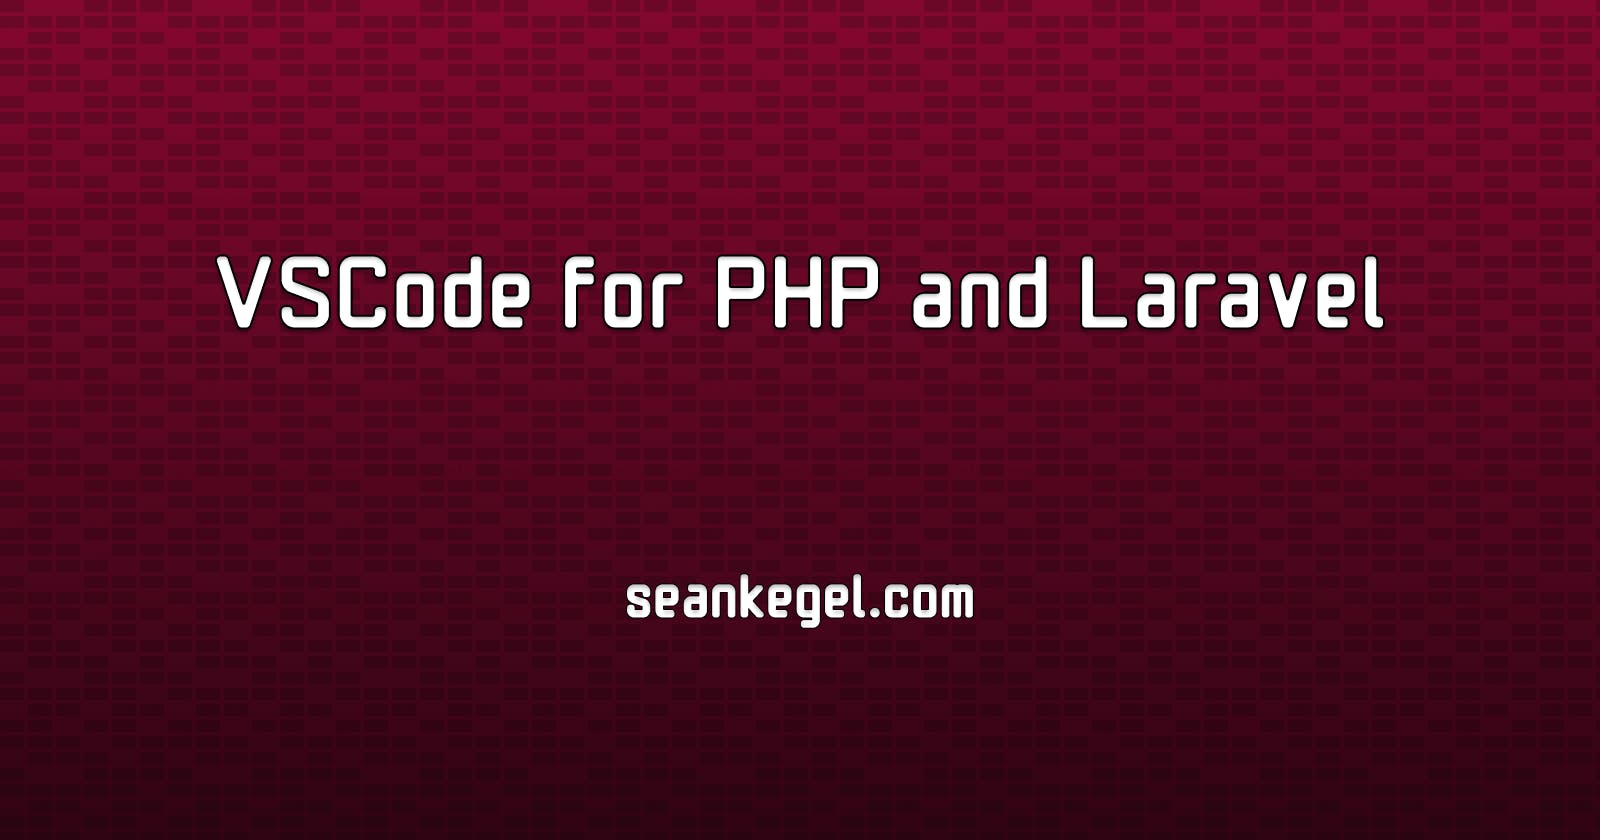 VSCode for PHP and Laravel